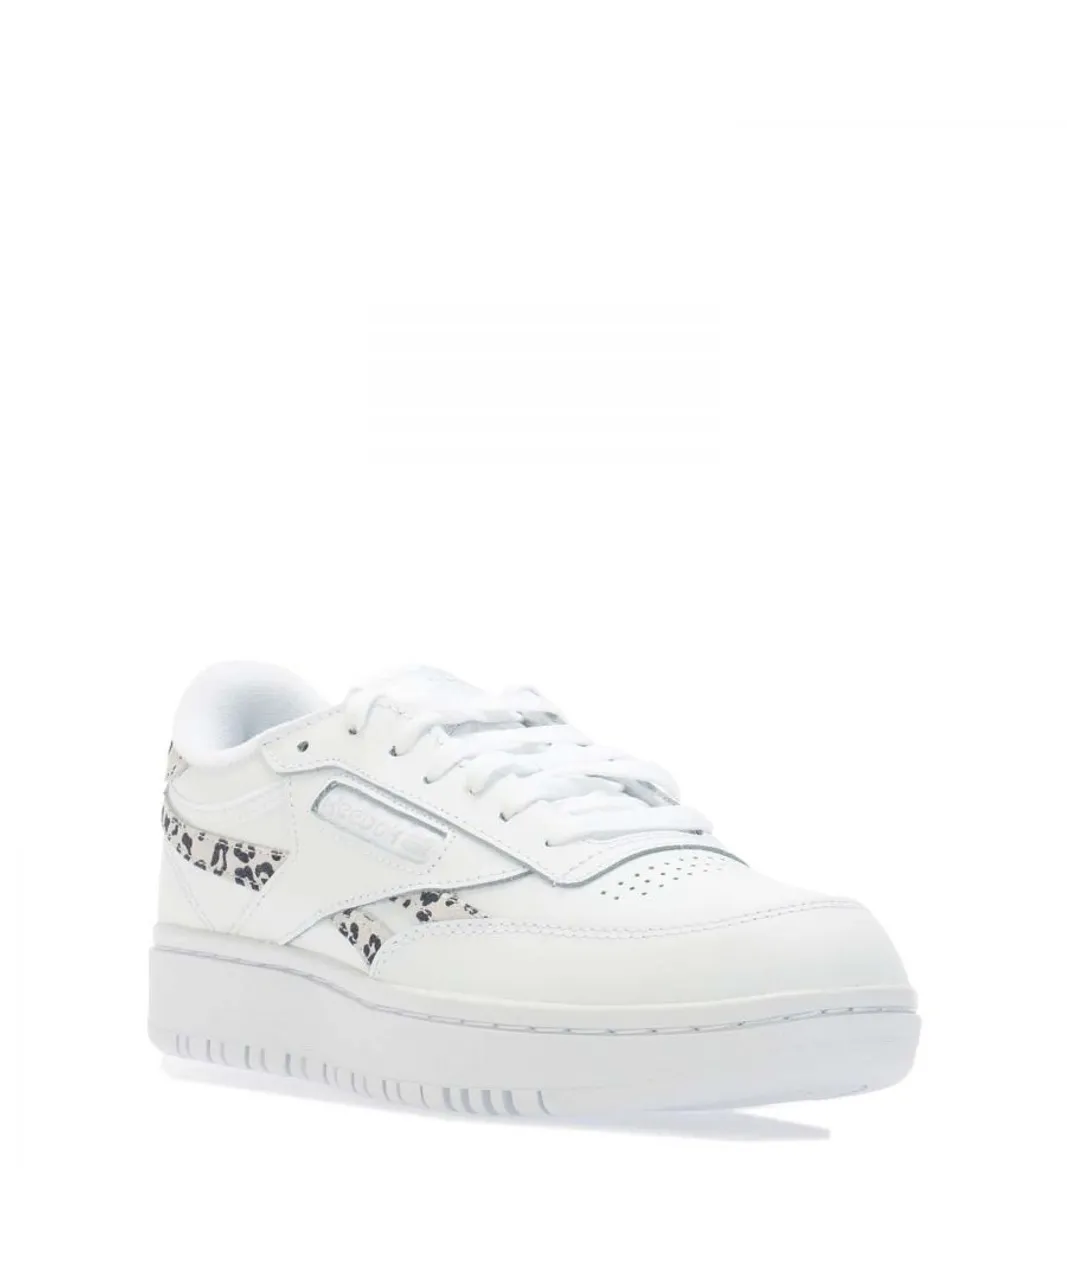 Reebok Womenss Classics Club C Double Revenge Trainers in White Leather (archived)